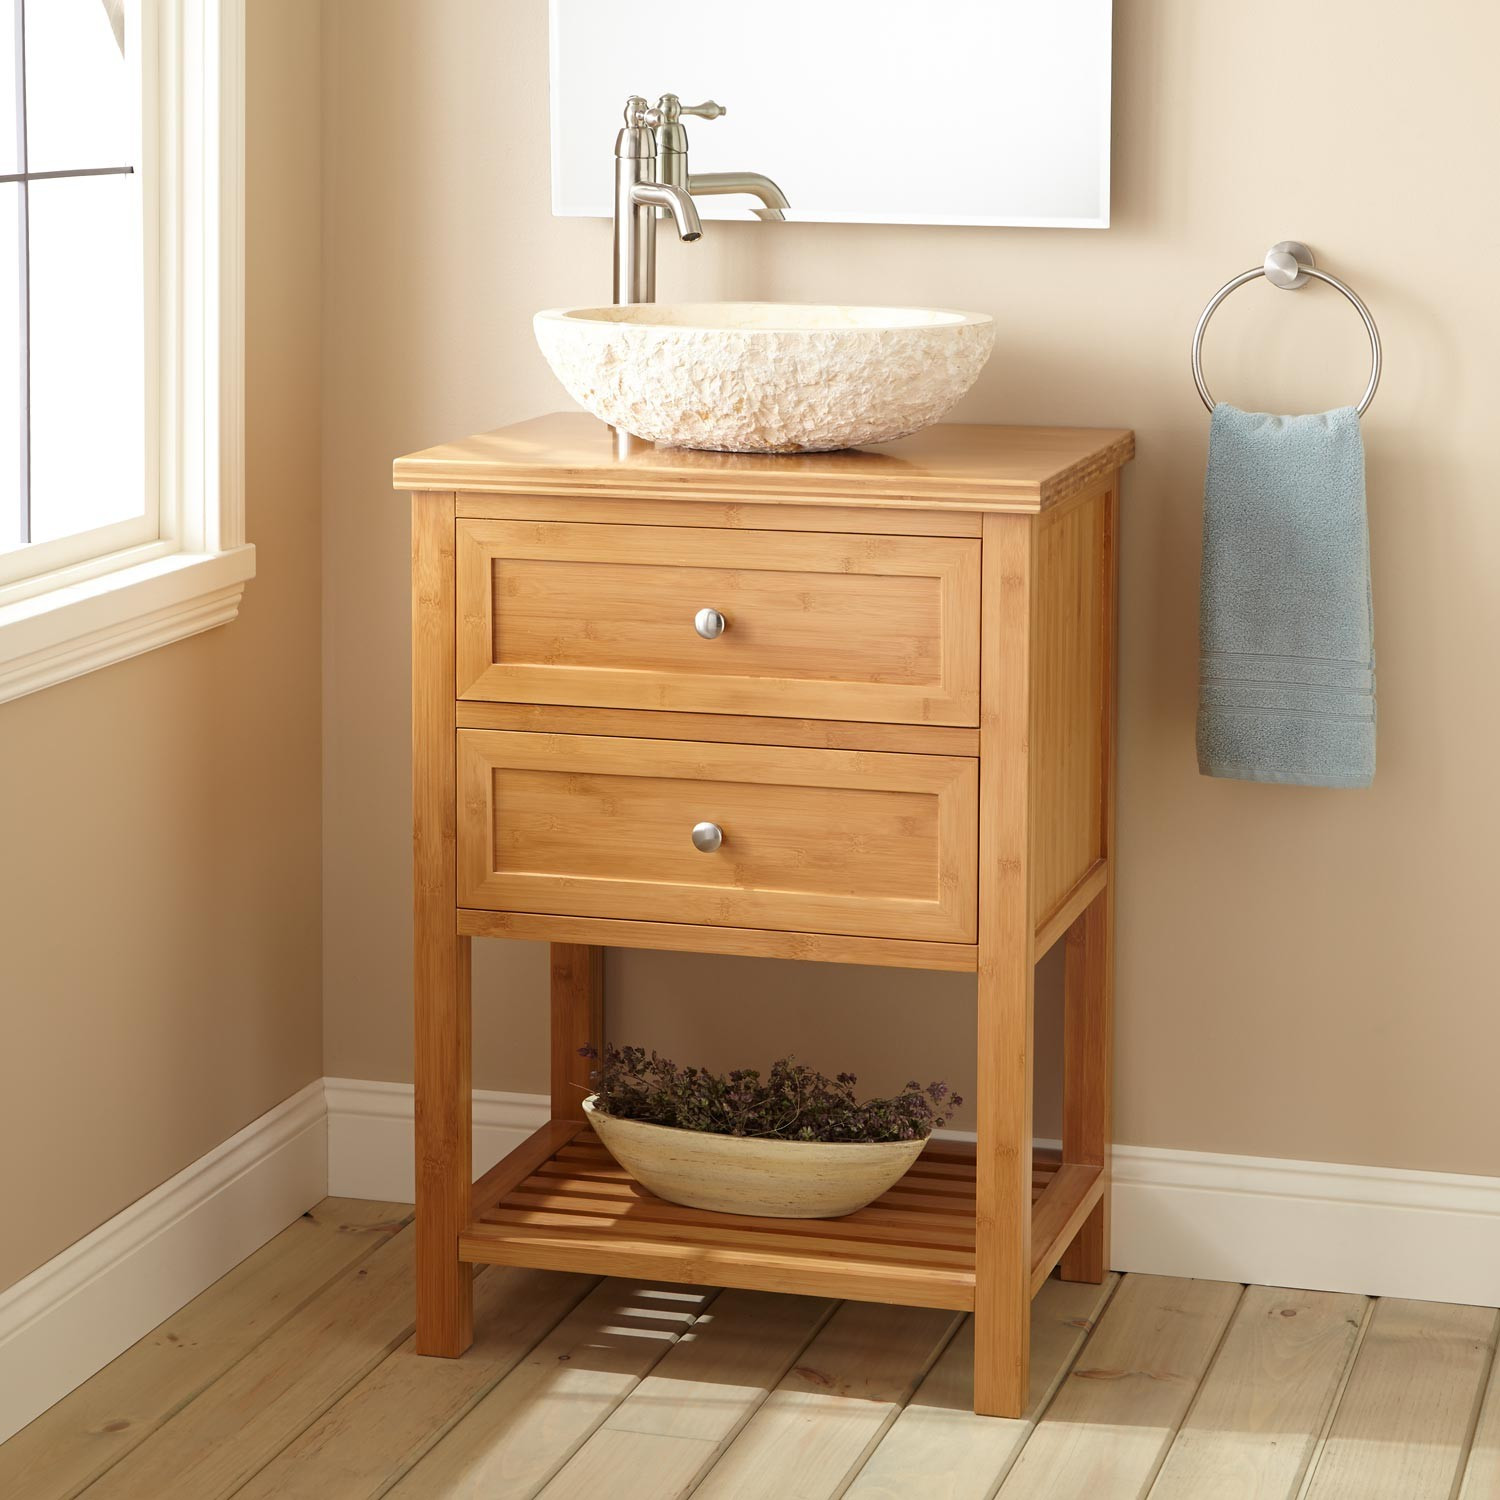 35 Luxury Shallow Depth Bathroom Vanity - Home, Decoration, Style and ...